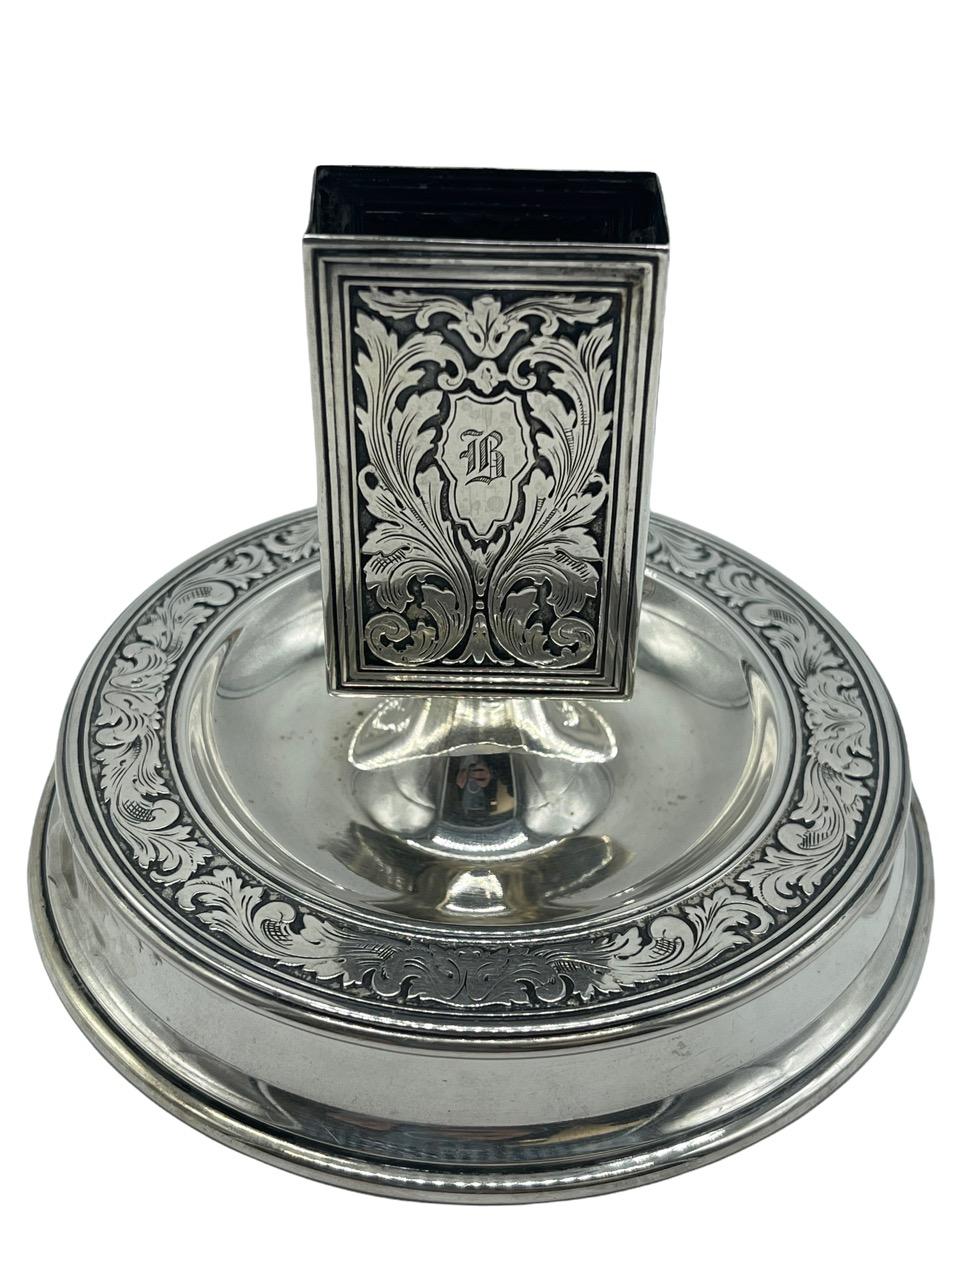 19th Century Sterling Silver Match Box Holder and Ashtray Stand by Tiffany & Co For Sale 1